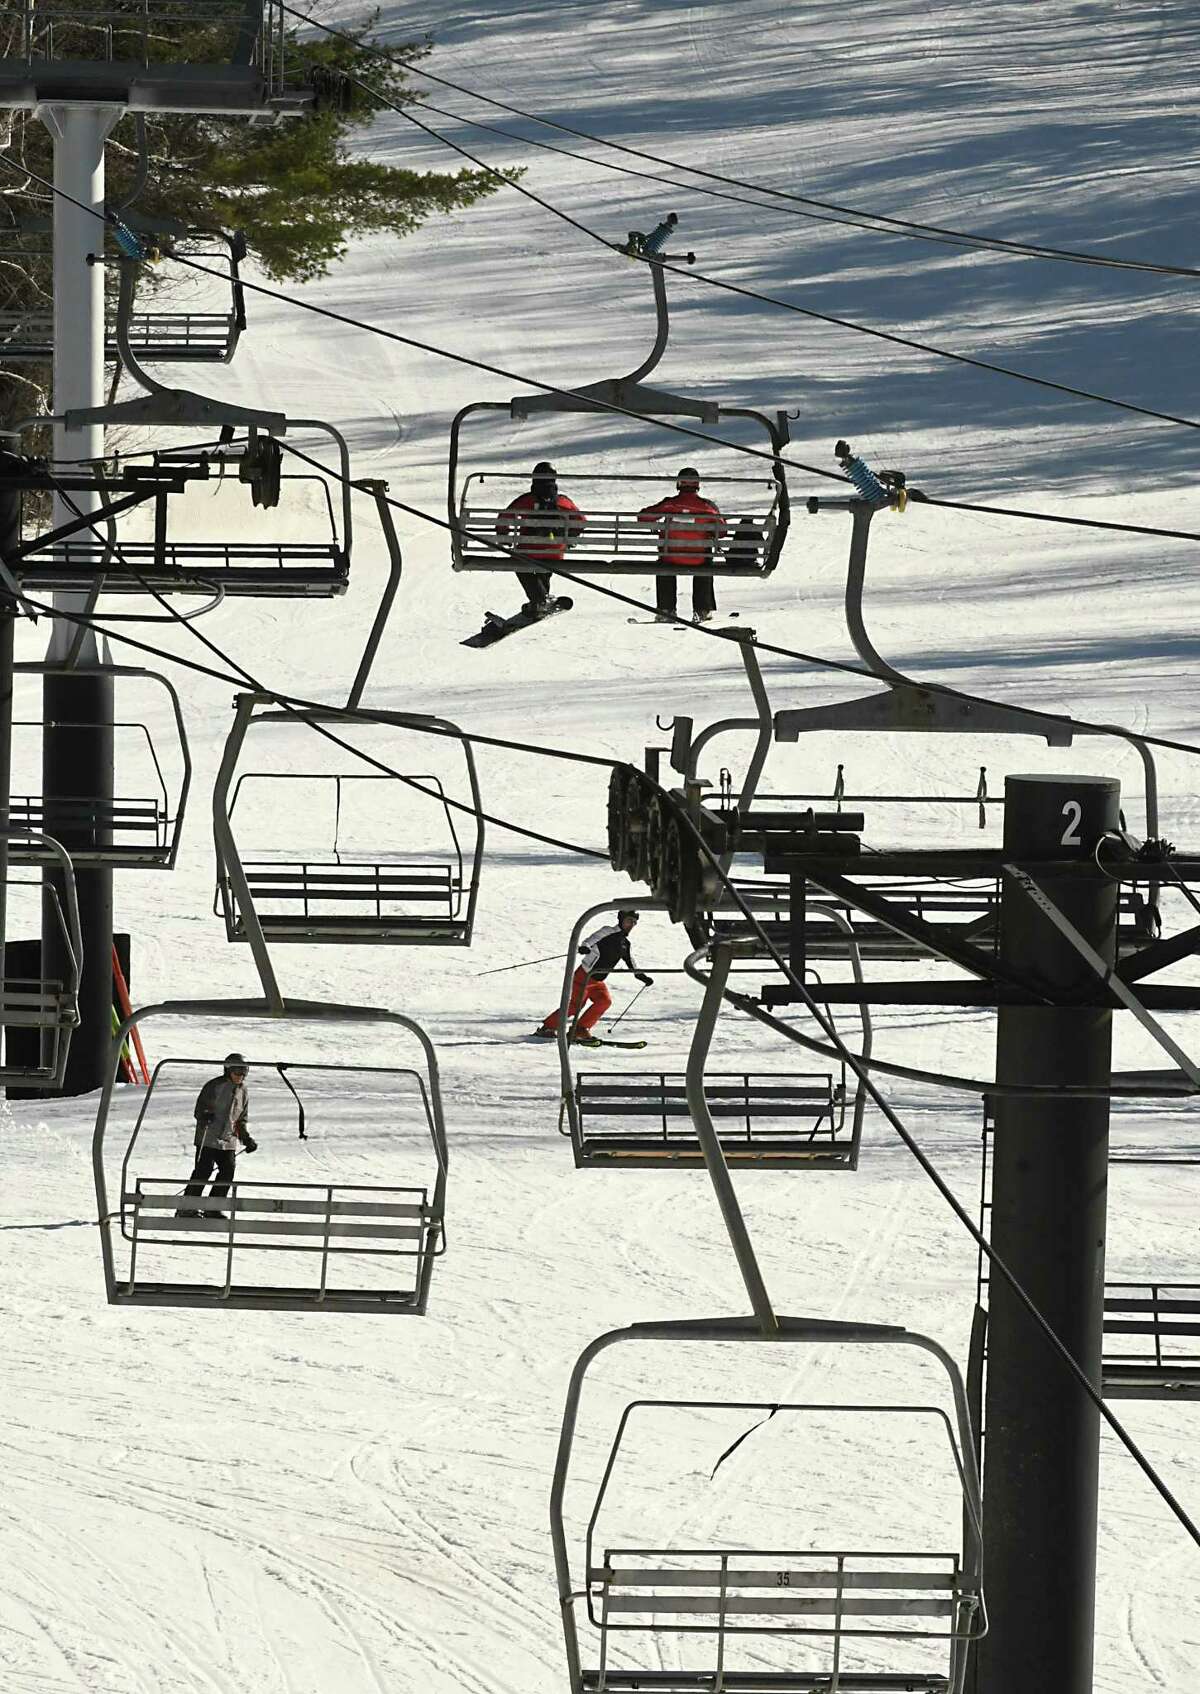 Skiers take the chair lift to the top of the mountain as others make their way down the slope at Jiminy Peak Mountain Resort on Monday, March 26, 2018 in Hancock, Mass. (Lori Van Buren/Times Union)